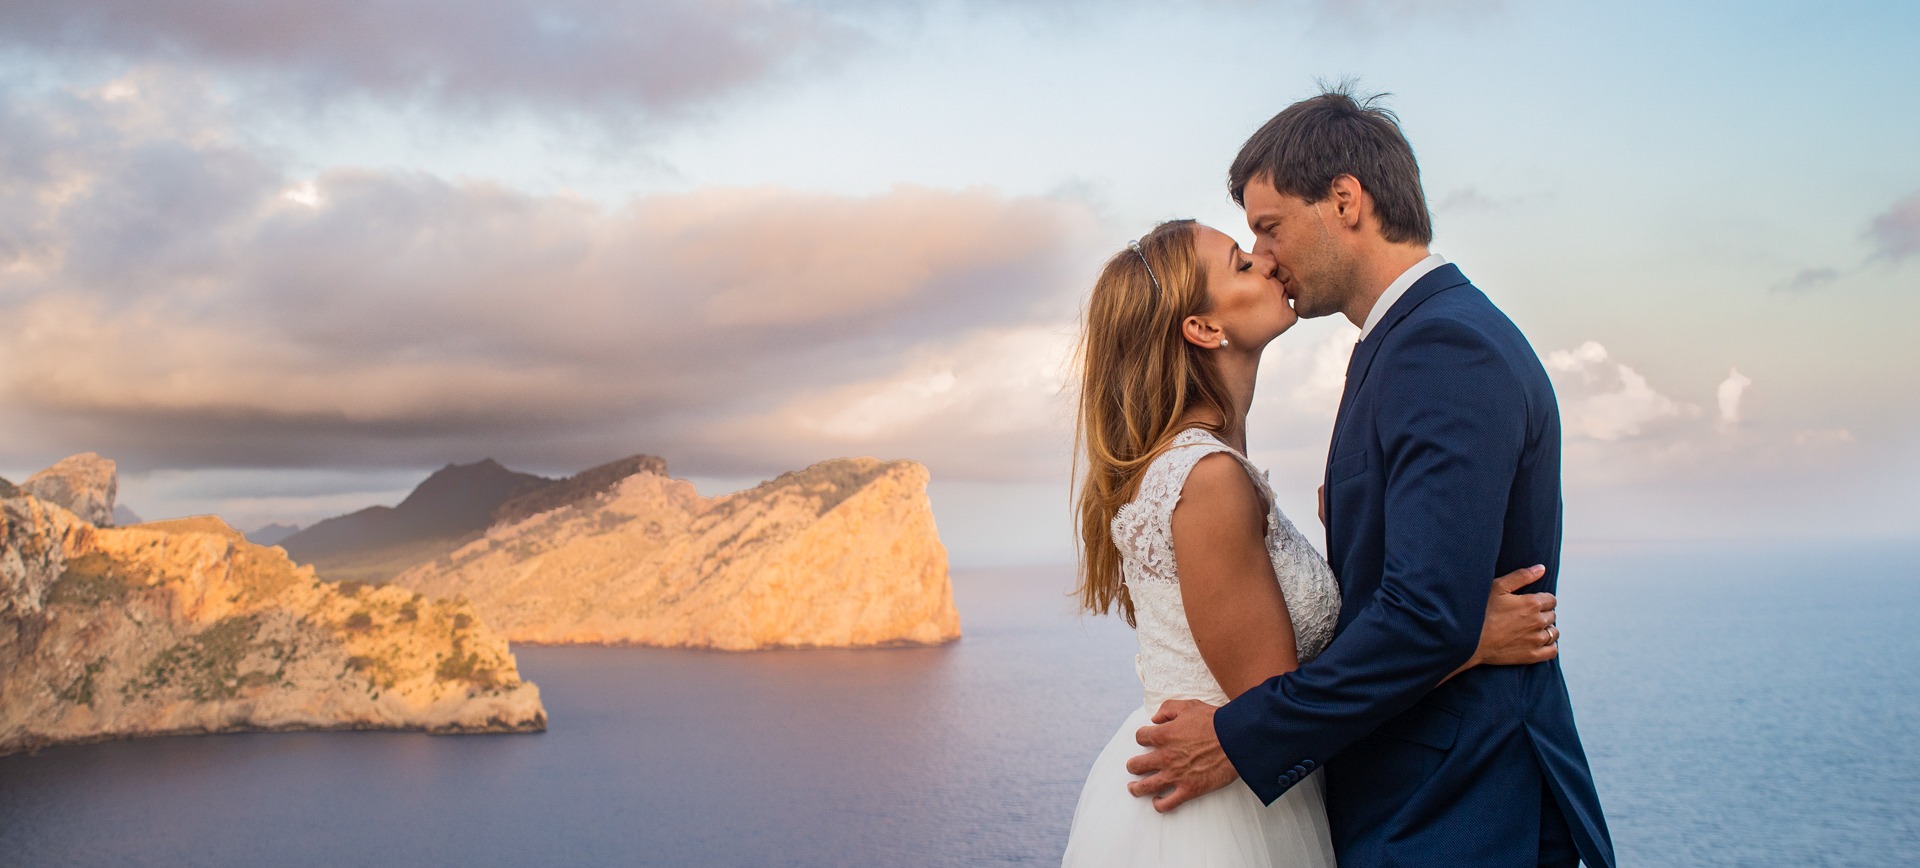 Mallorca beach elopement in Cap formentor - bride and groom kissing in sunrise in front of amazing oceanviews